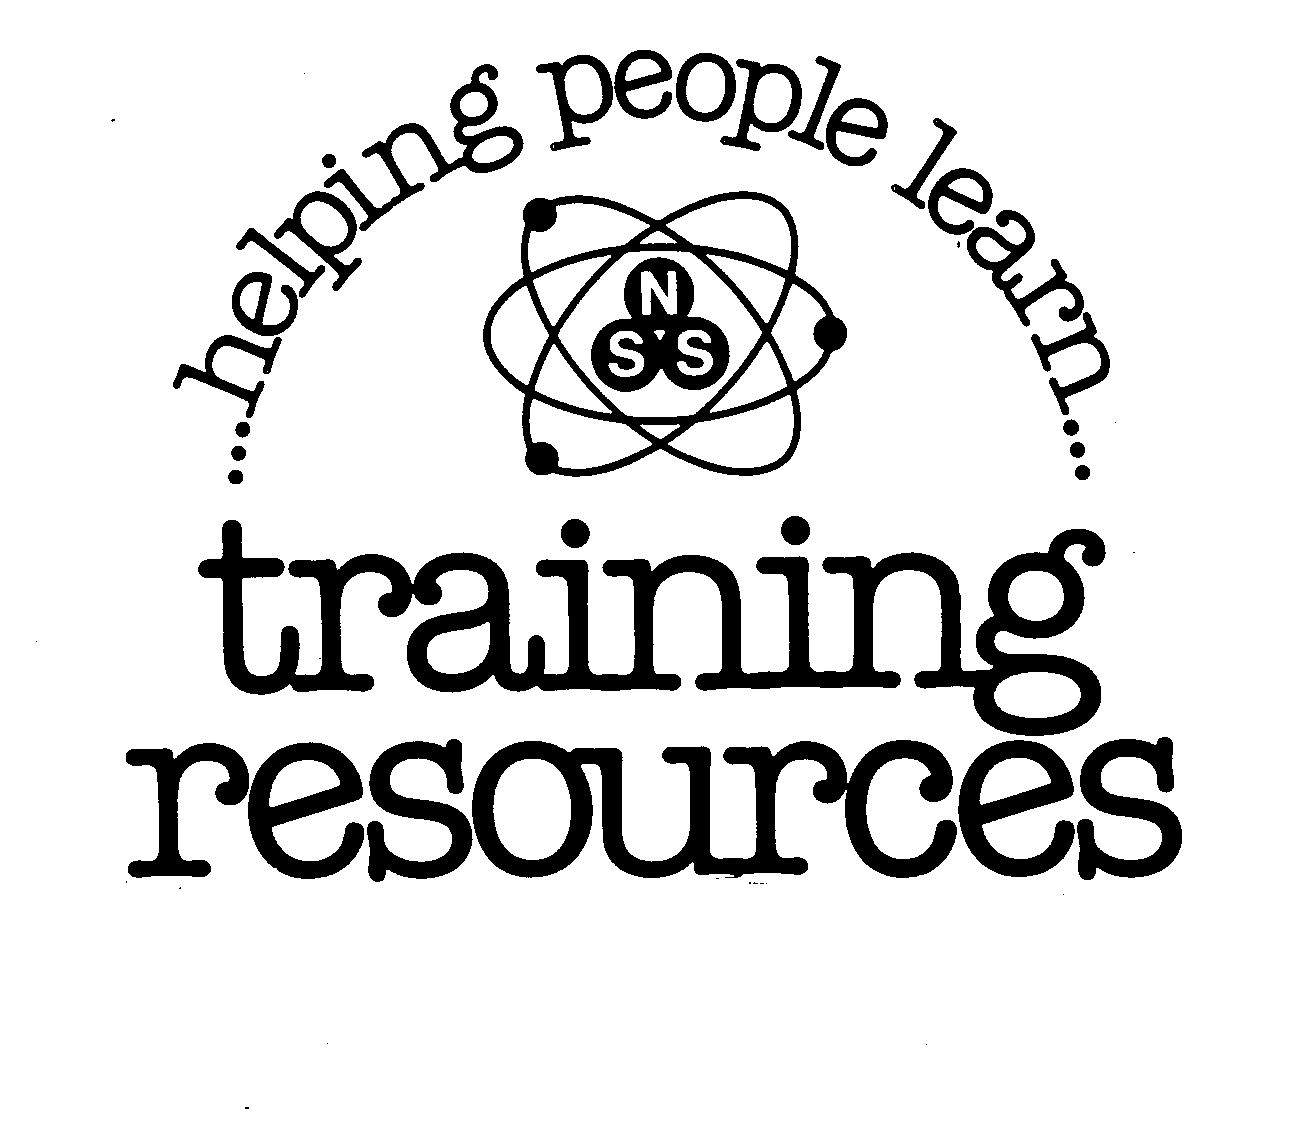 Trademark Logo NSS...HELPING PEOPLE LEARN...TRAINING RESOURCES